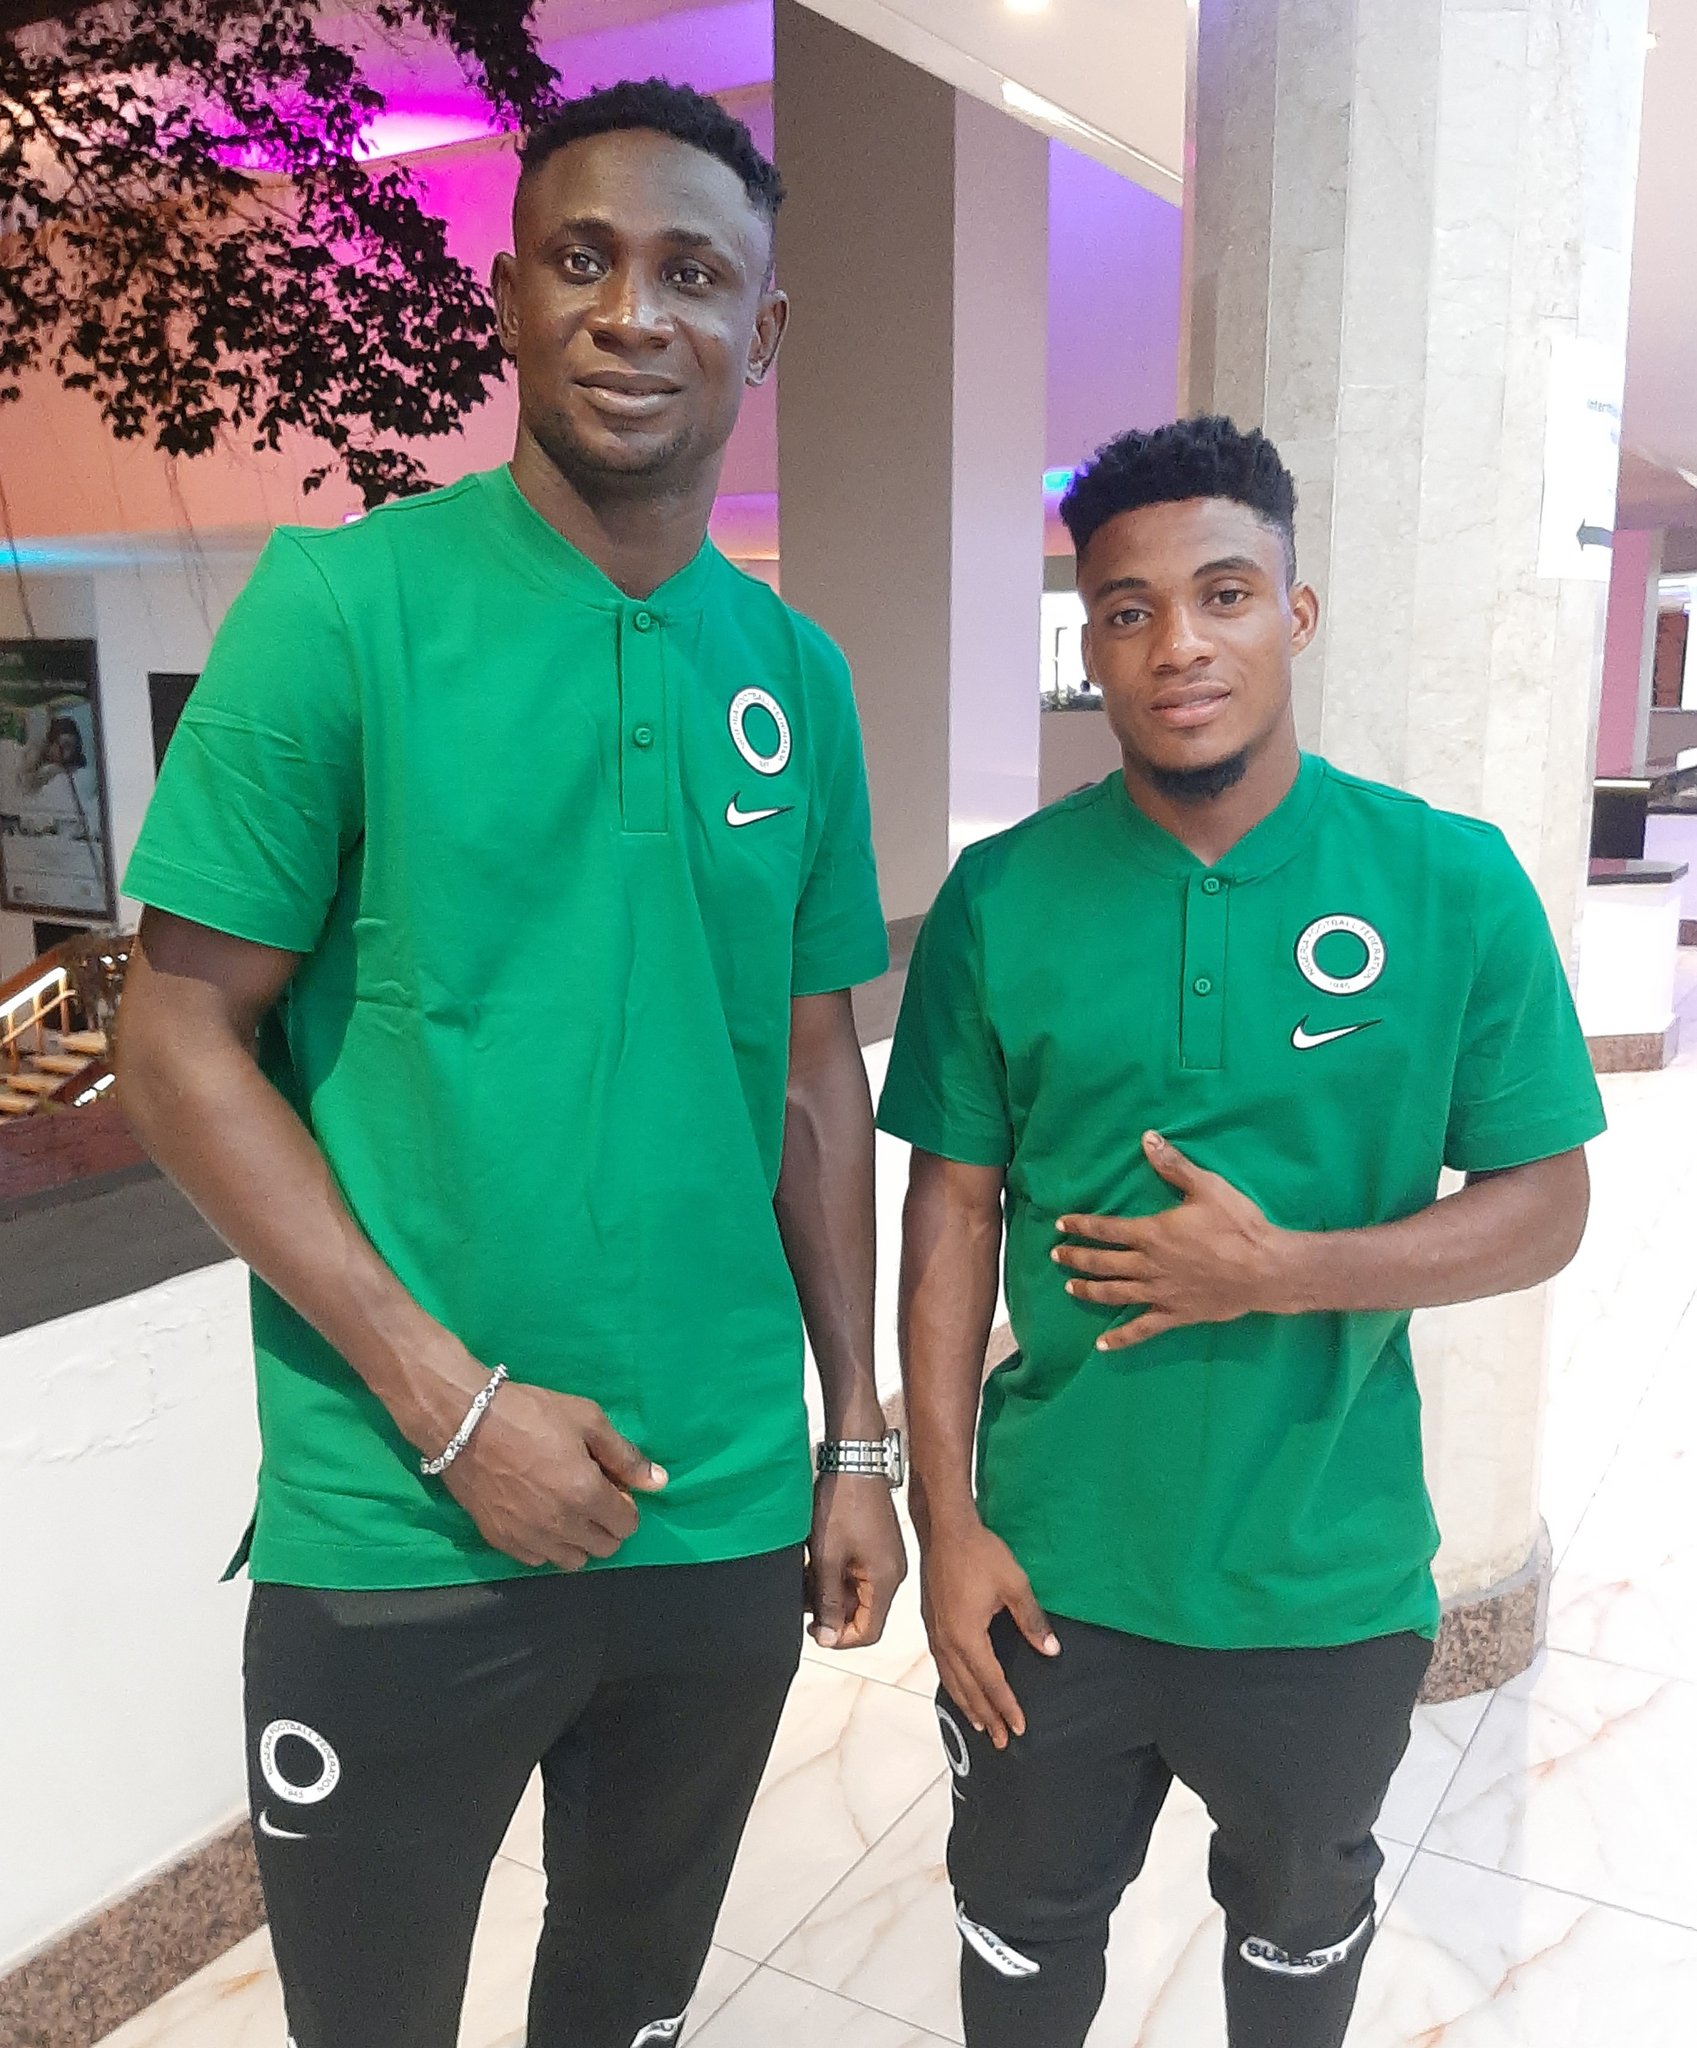 Super Eagles Camp Comes Alive As More Players Arrive For AFCON Qualifiers